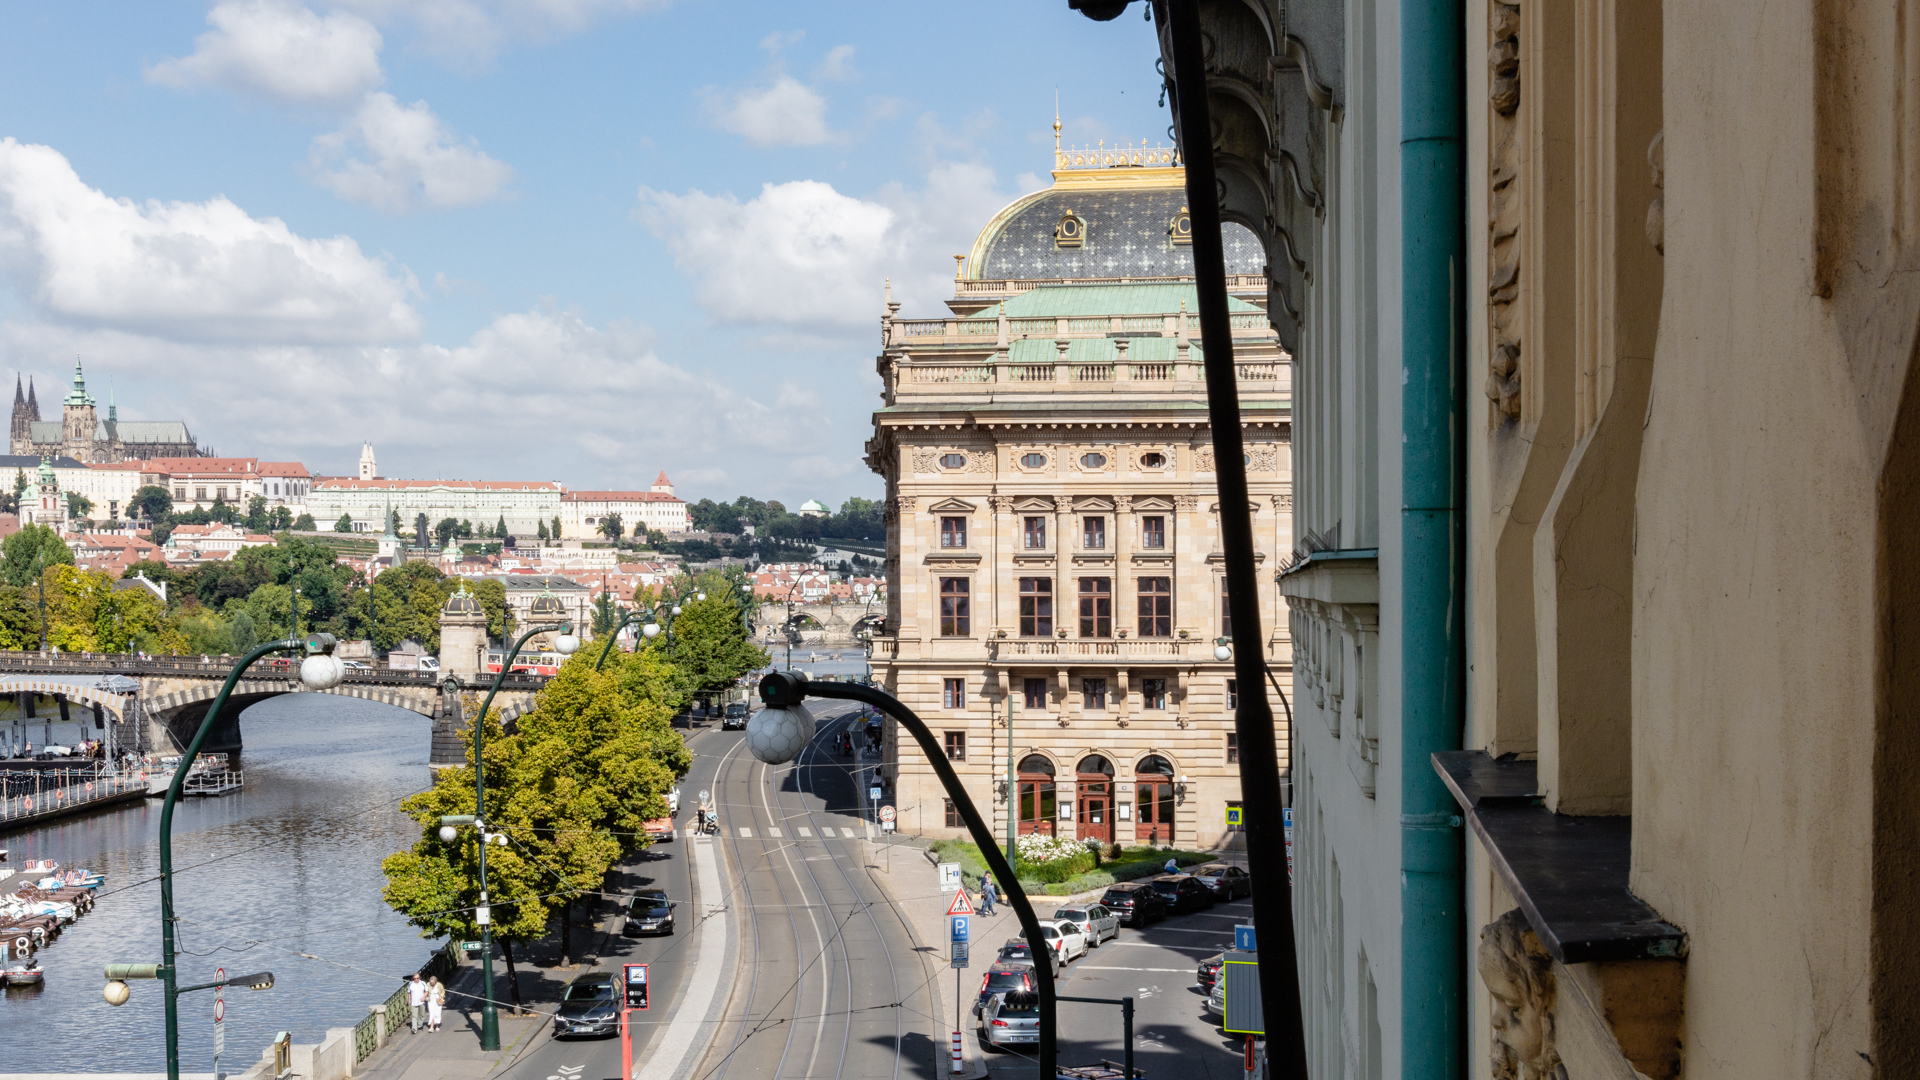 Apartment 3+ 1 with a view, Prague 1 – Masaryk quay